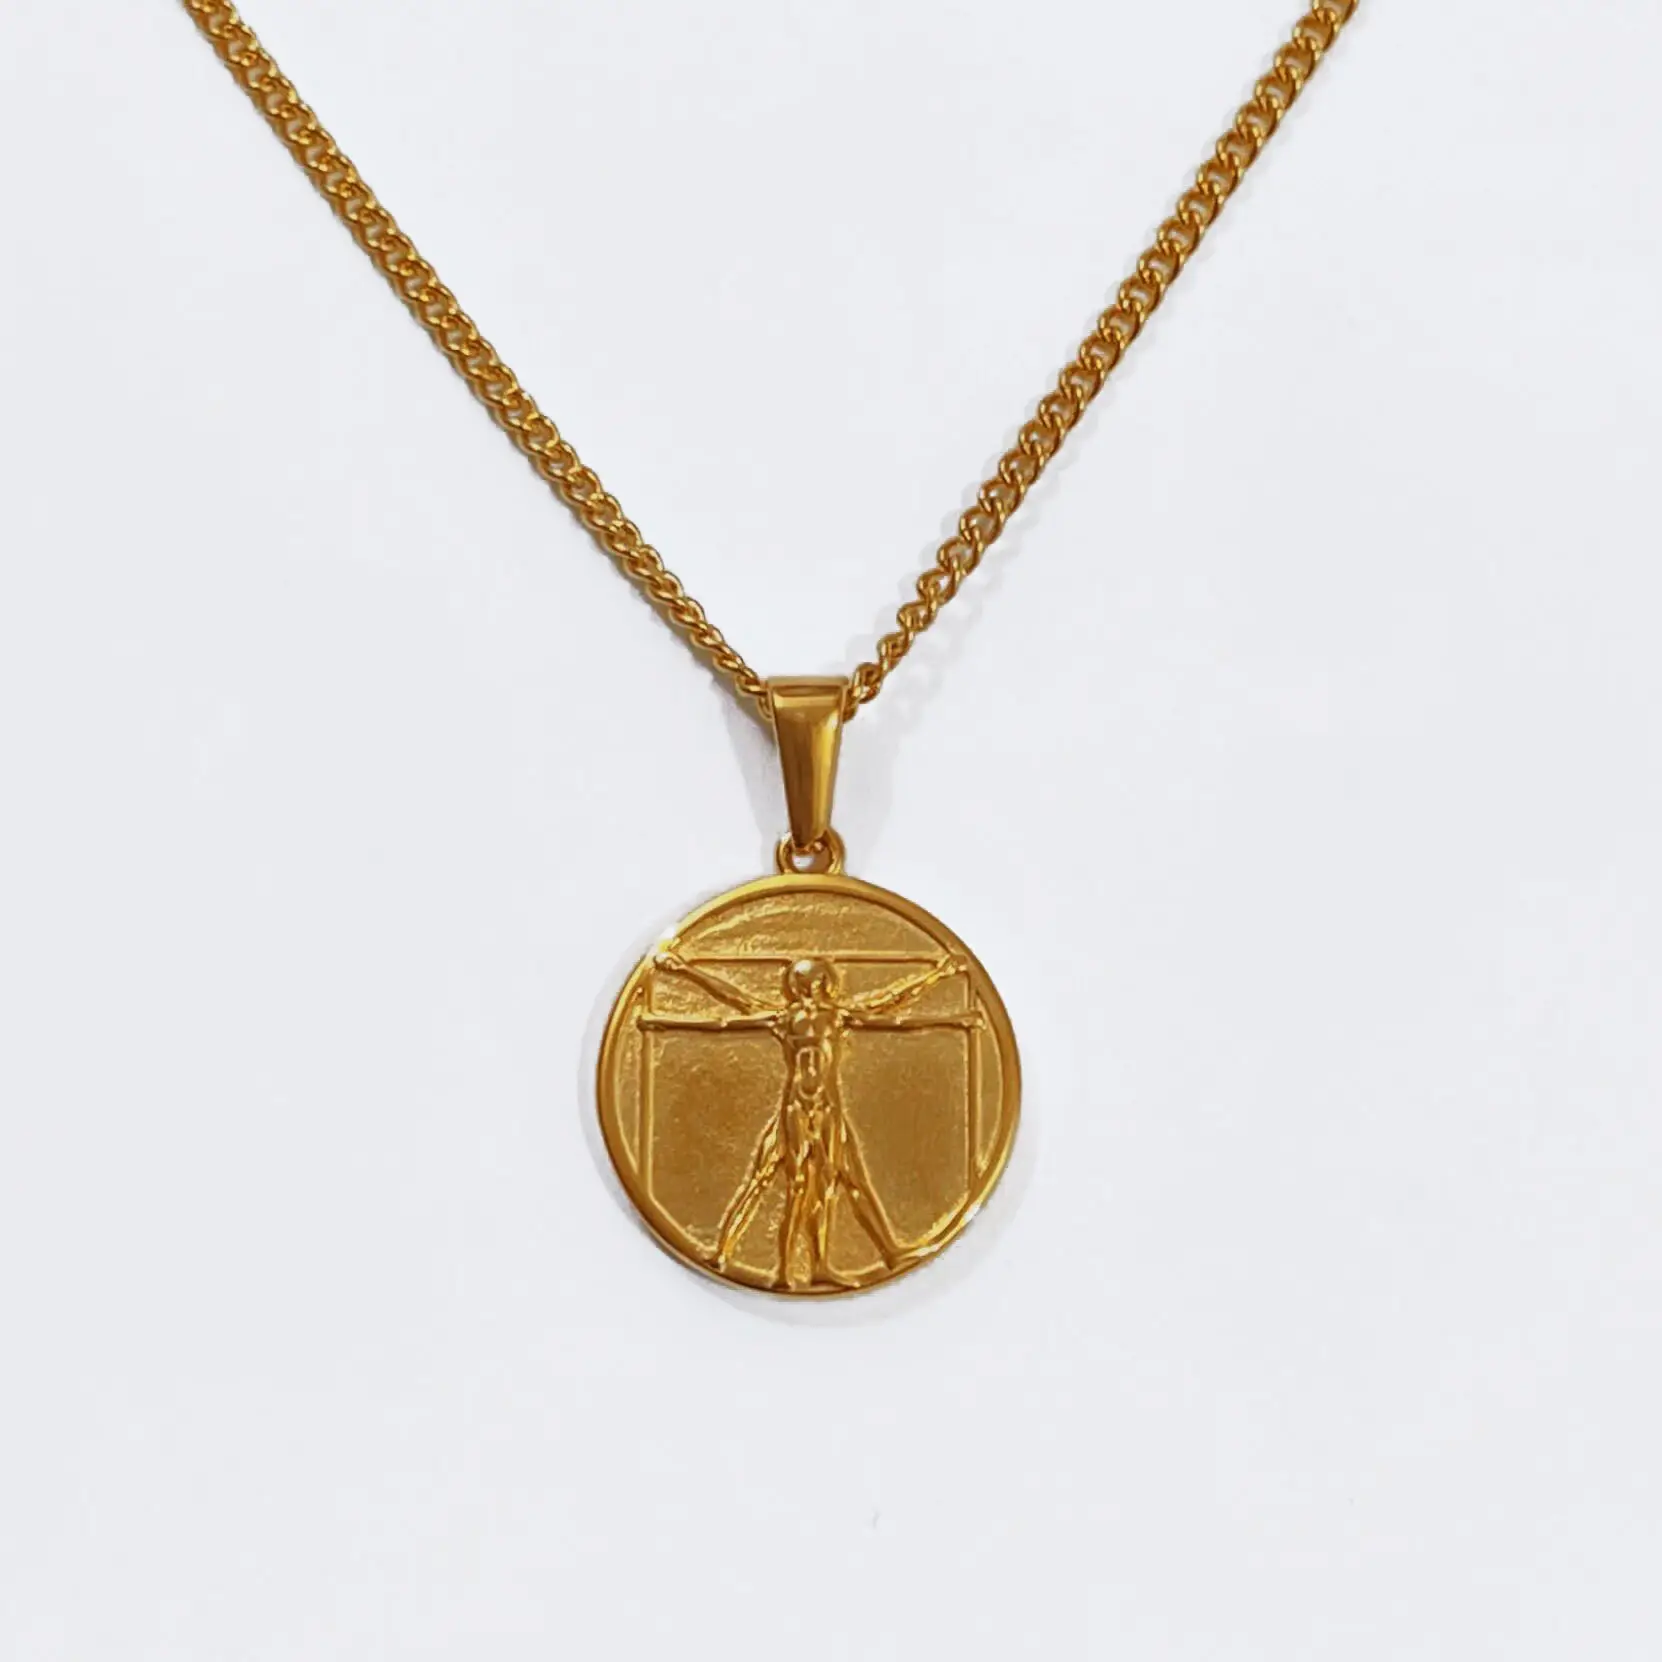 In stock Sword Medusa Compass Necklace Stainless Steel 18K Gold Plated King Lion Pendant Vitruvian Man Pendant Necklace